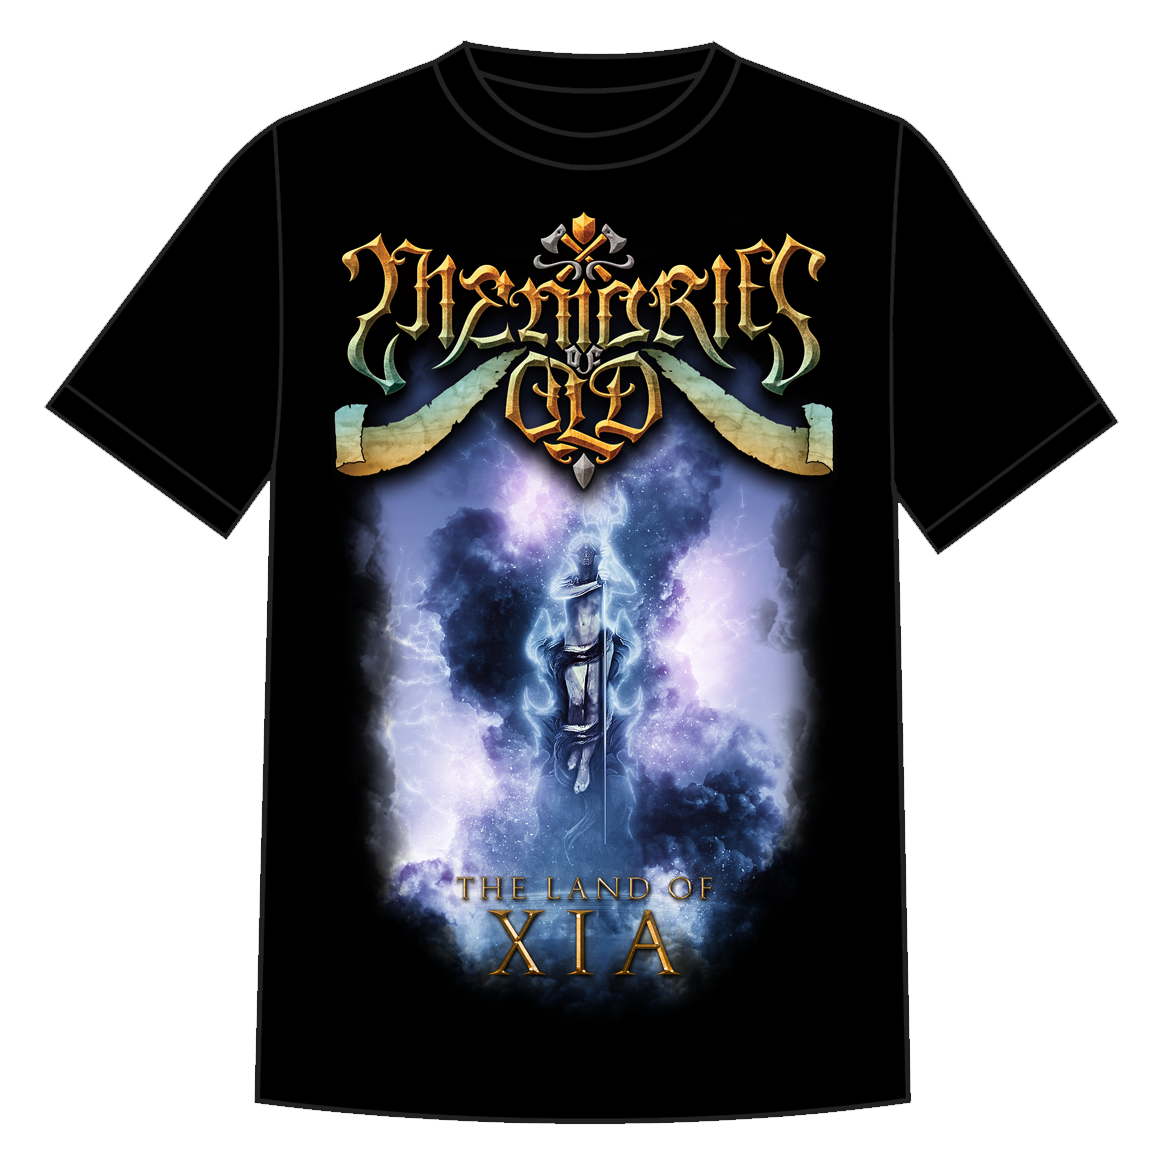 MEMORIES OF OLD - The Land Of Xia T-Shirt size L